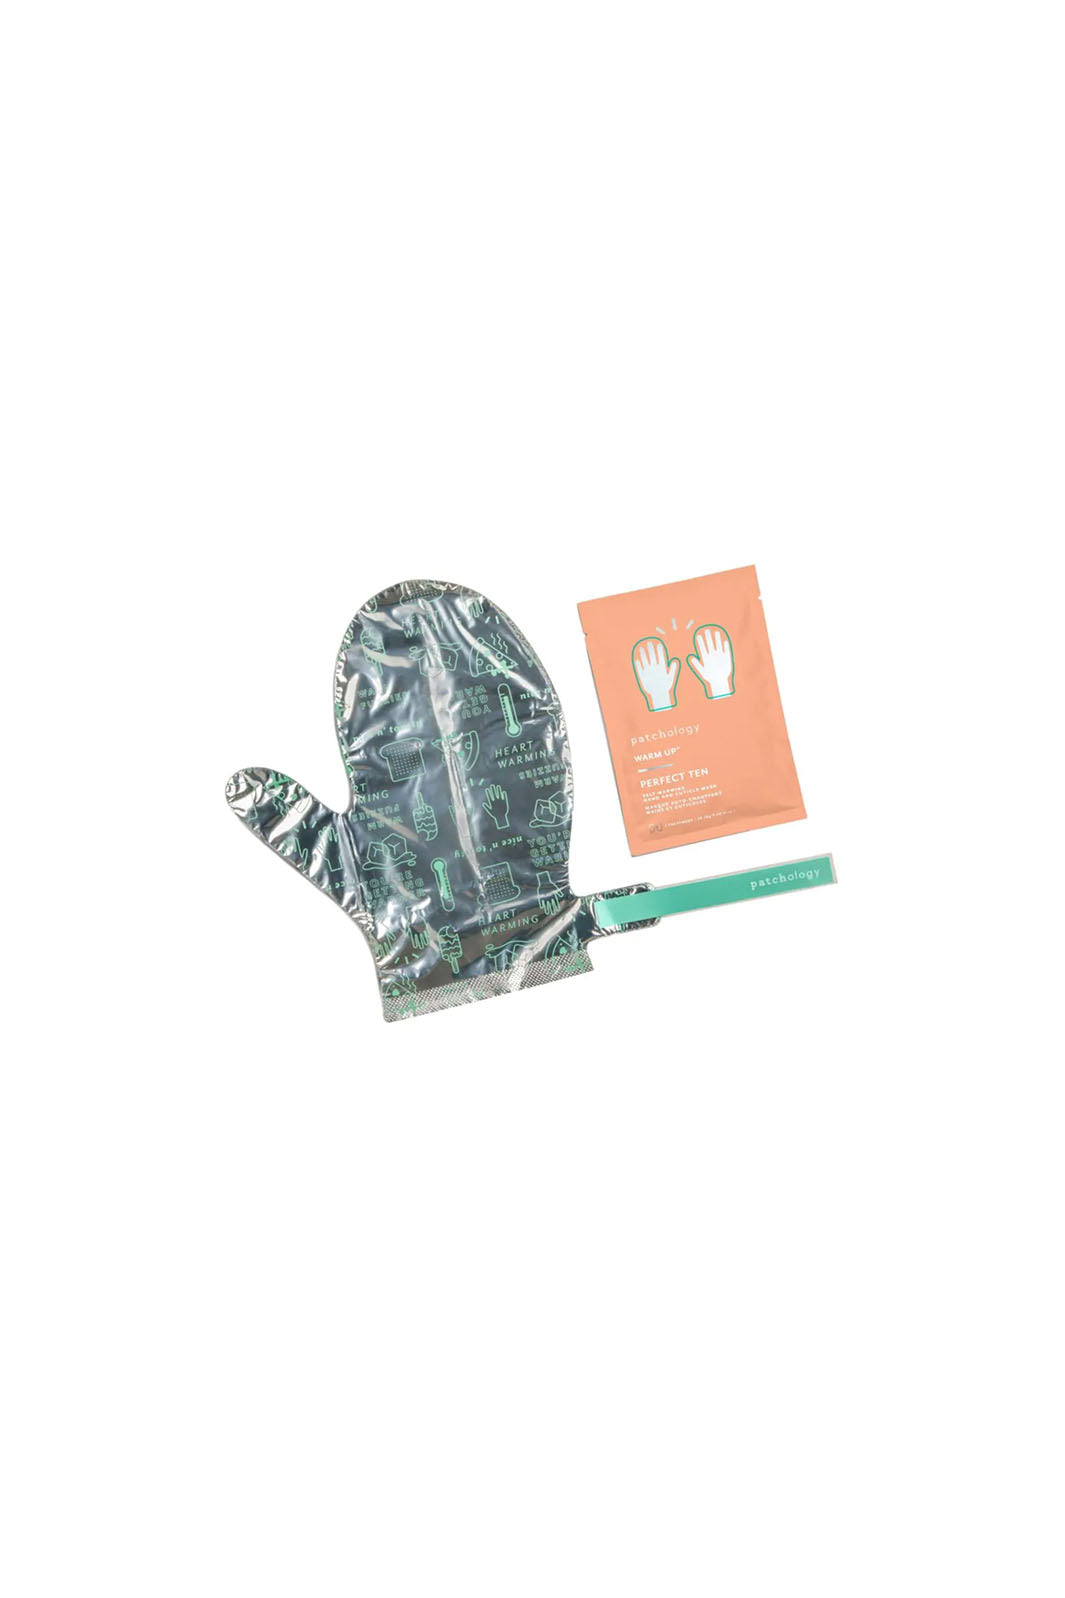 Inside view of Perfect 10 Heated Hand & Cuticle mask. Foil glove and pink package it is enclosed in. 